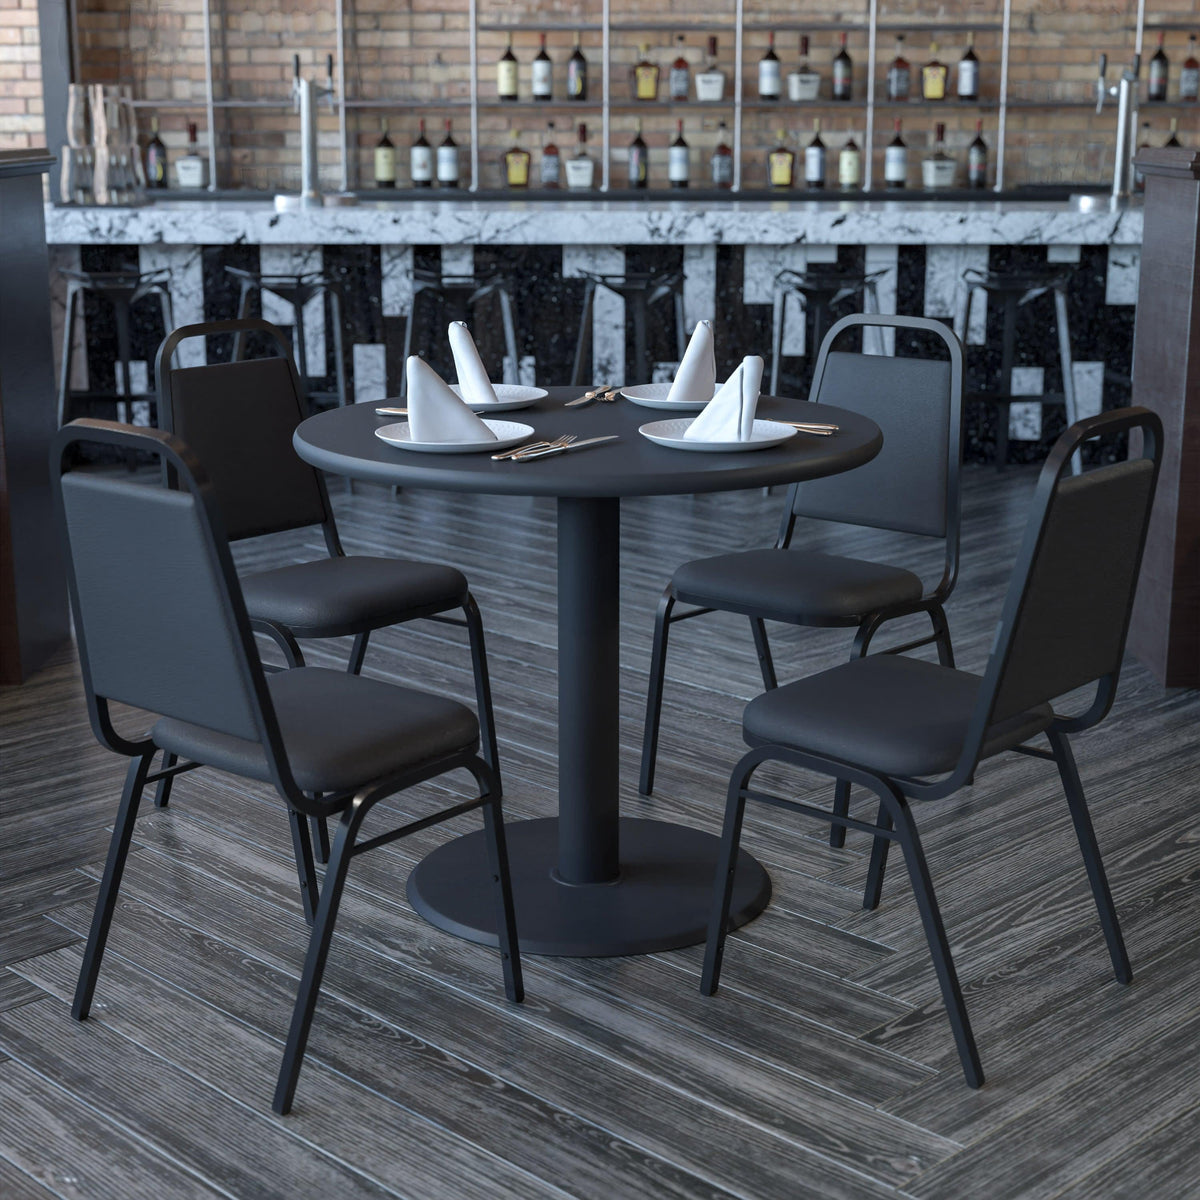 Black Top/Black Vinyl Seat |#| 36inch Round Black Laminate Table Set with X-Base and 4 Black Banquet Chairs